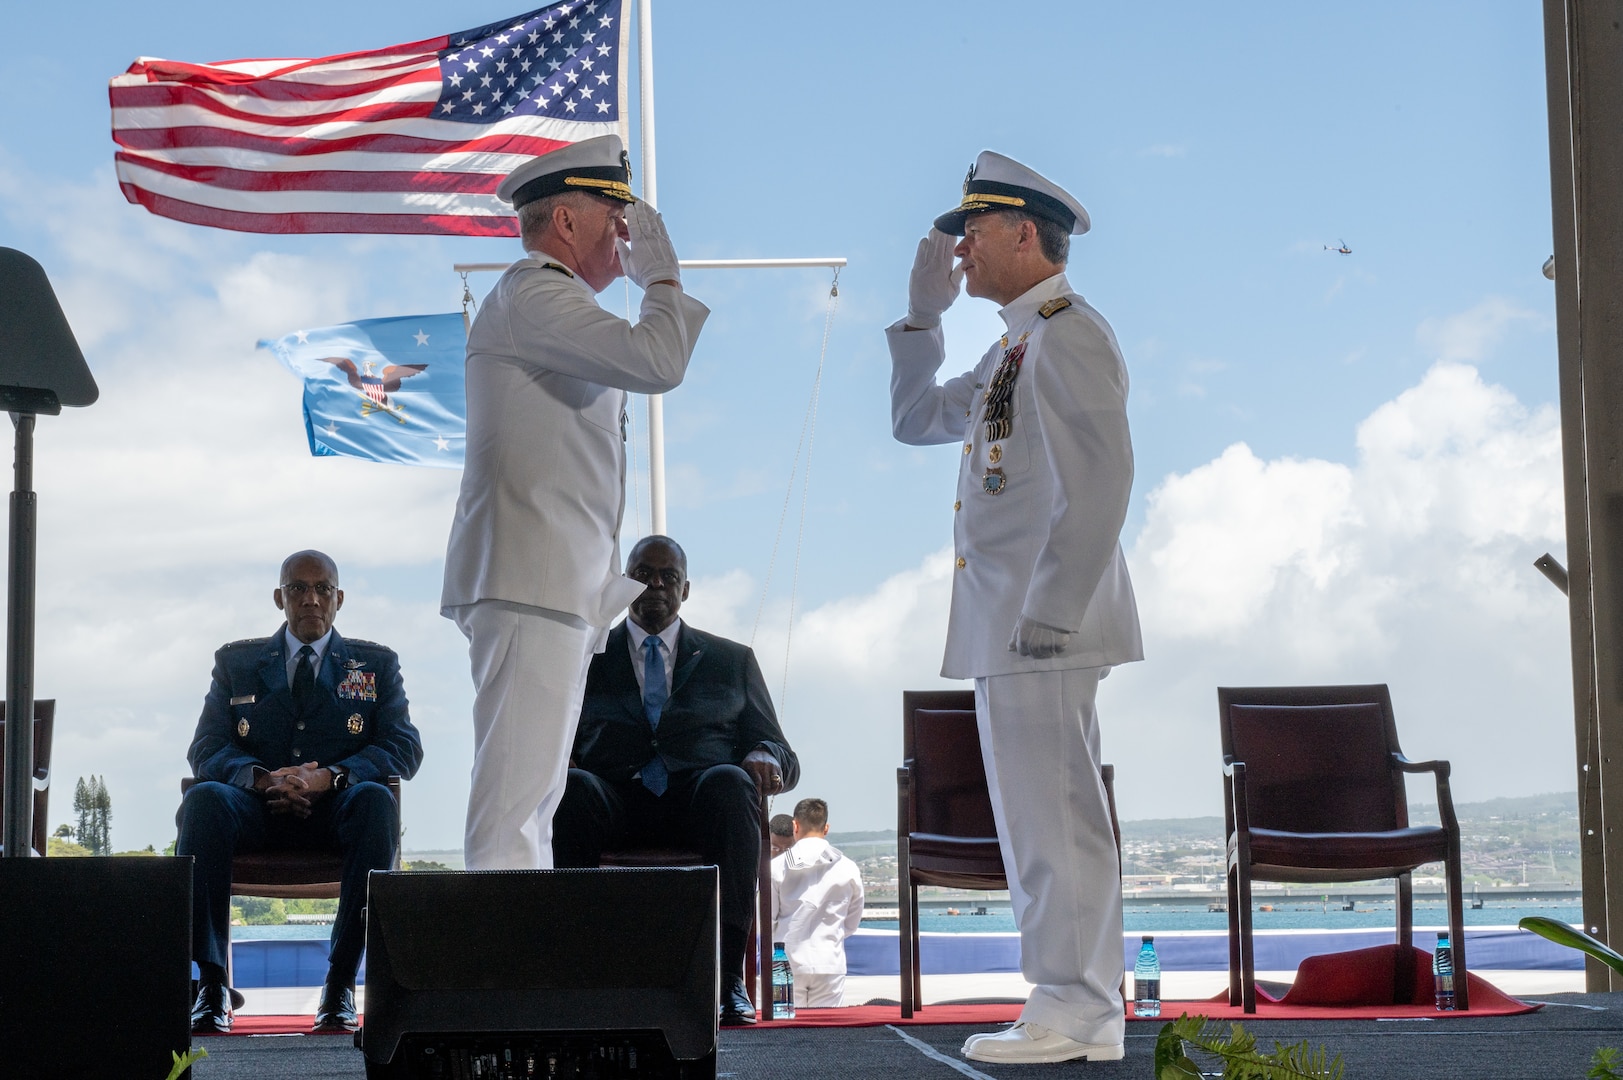 U.S. Indo-Pacific Command Holds Change of Command Ceremony > U.S. Indo-Pacific Command > 2015